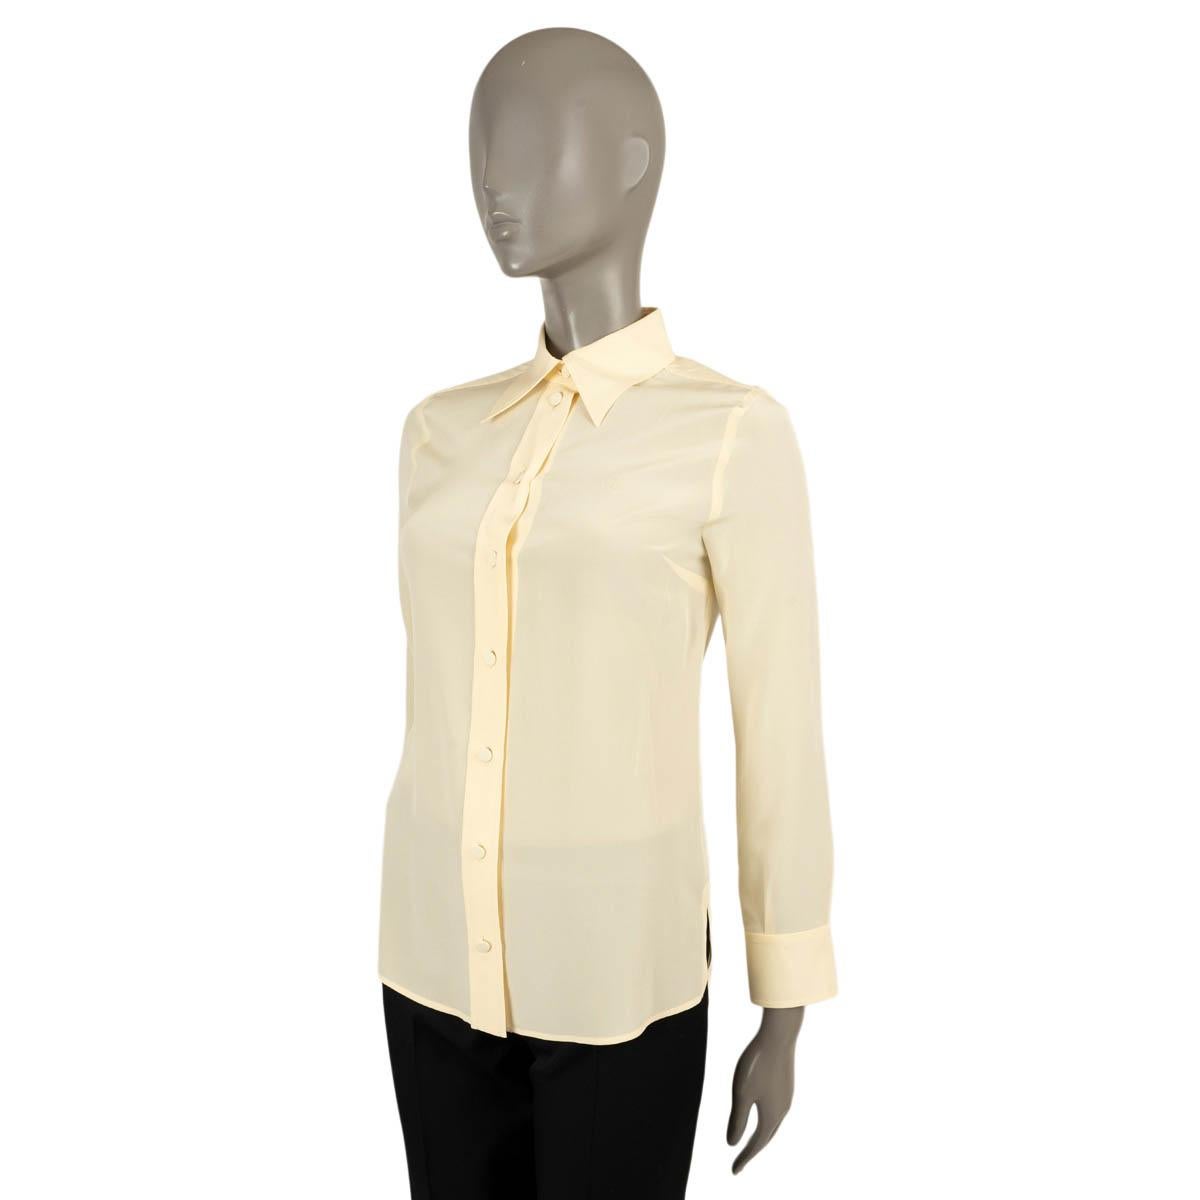 100% authentic Gucci crepe blouse in pale yellow silk (100%). Features GG embroidered at the chest and pointed collar. Closes with fabric covered buttons on the front. Has been worn and is in excellent condition.

2020